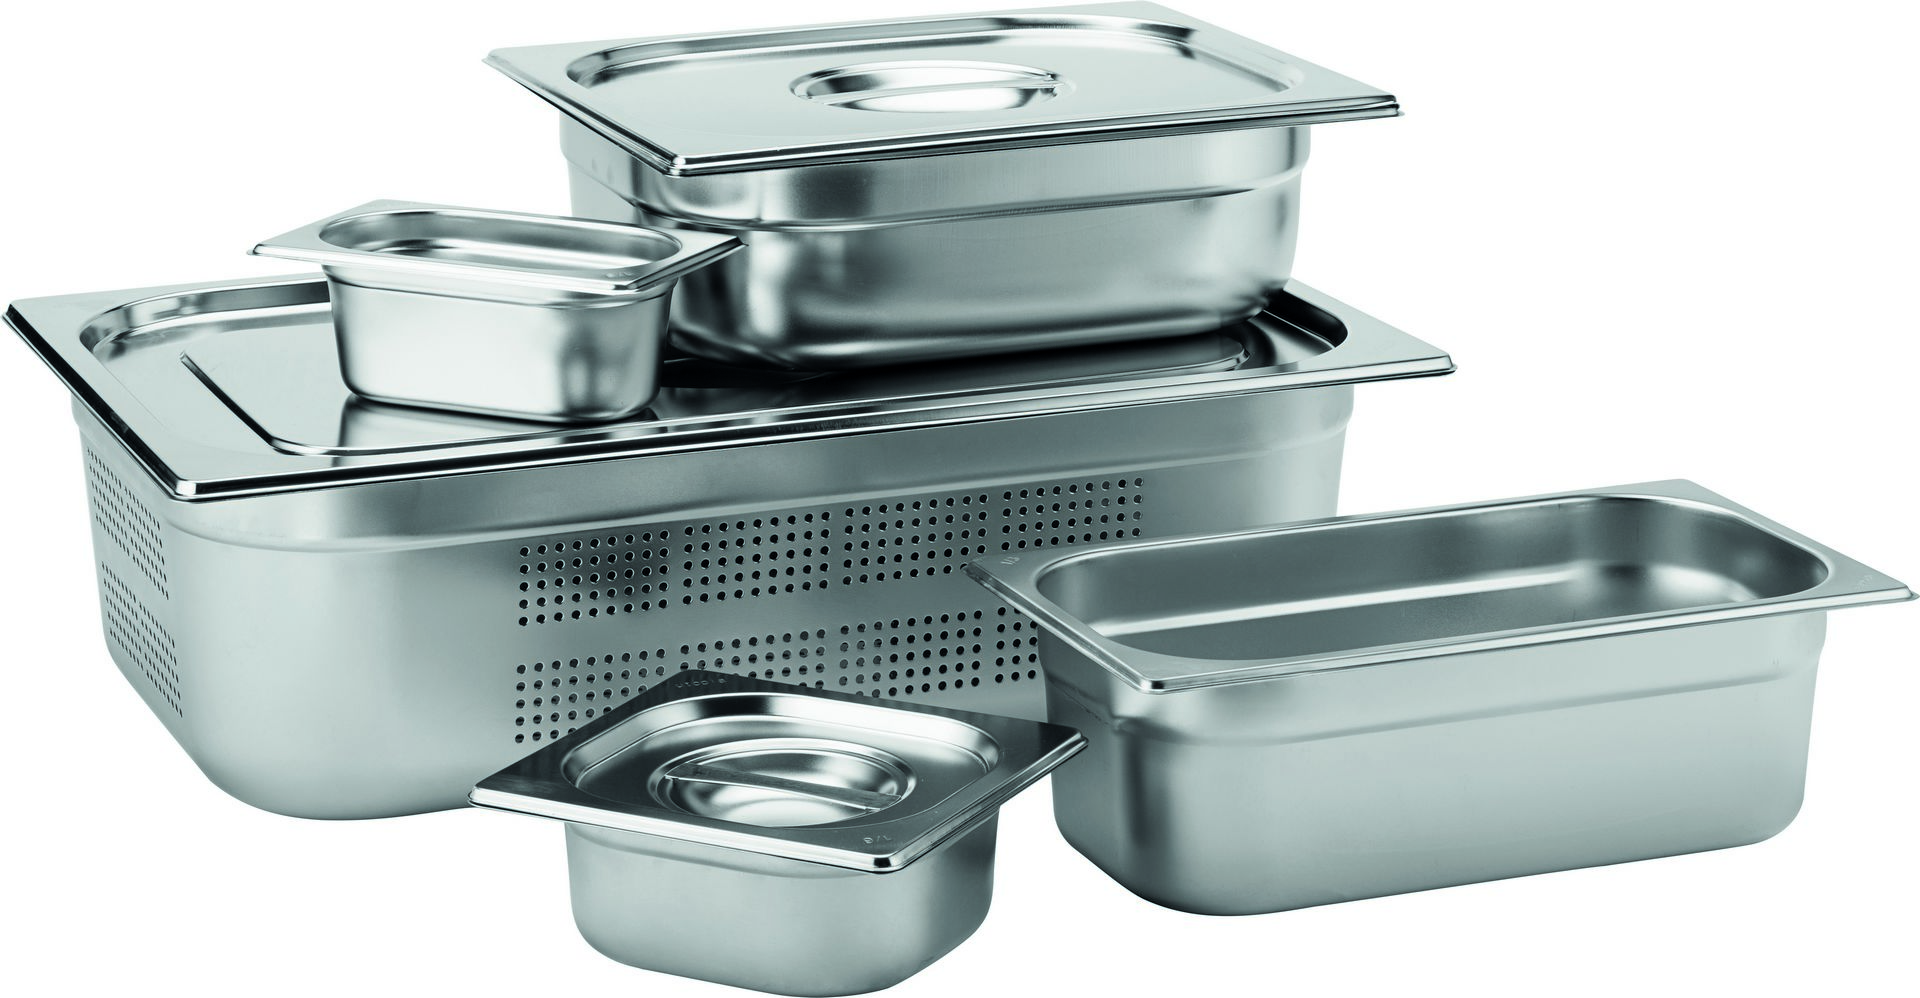 Stainless Steel GN 1/4 Pan 20cm Deep - F70010-000000-B01006 (Pack of 6)